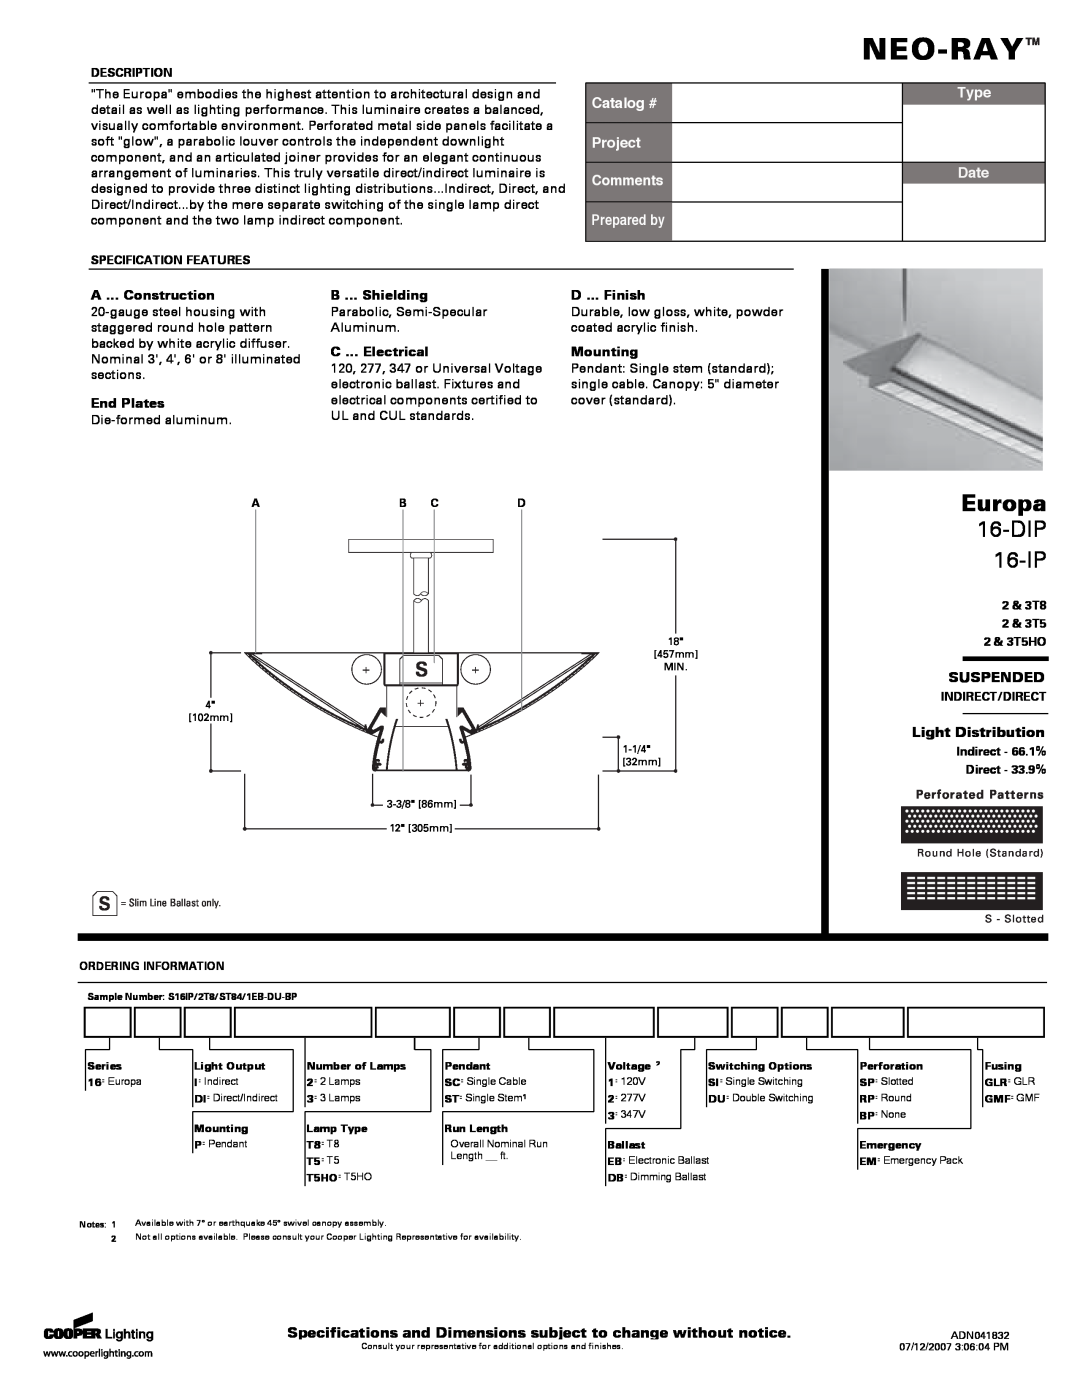 Cooper Lighting 16-DIP specifications Suspended, Light Distribution, Neo-Ray, Europa, DIP 16-IP, Catalog #, Prepared by 